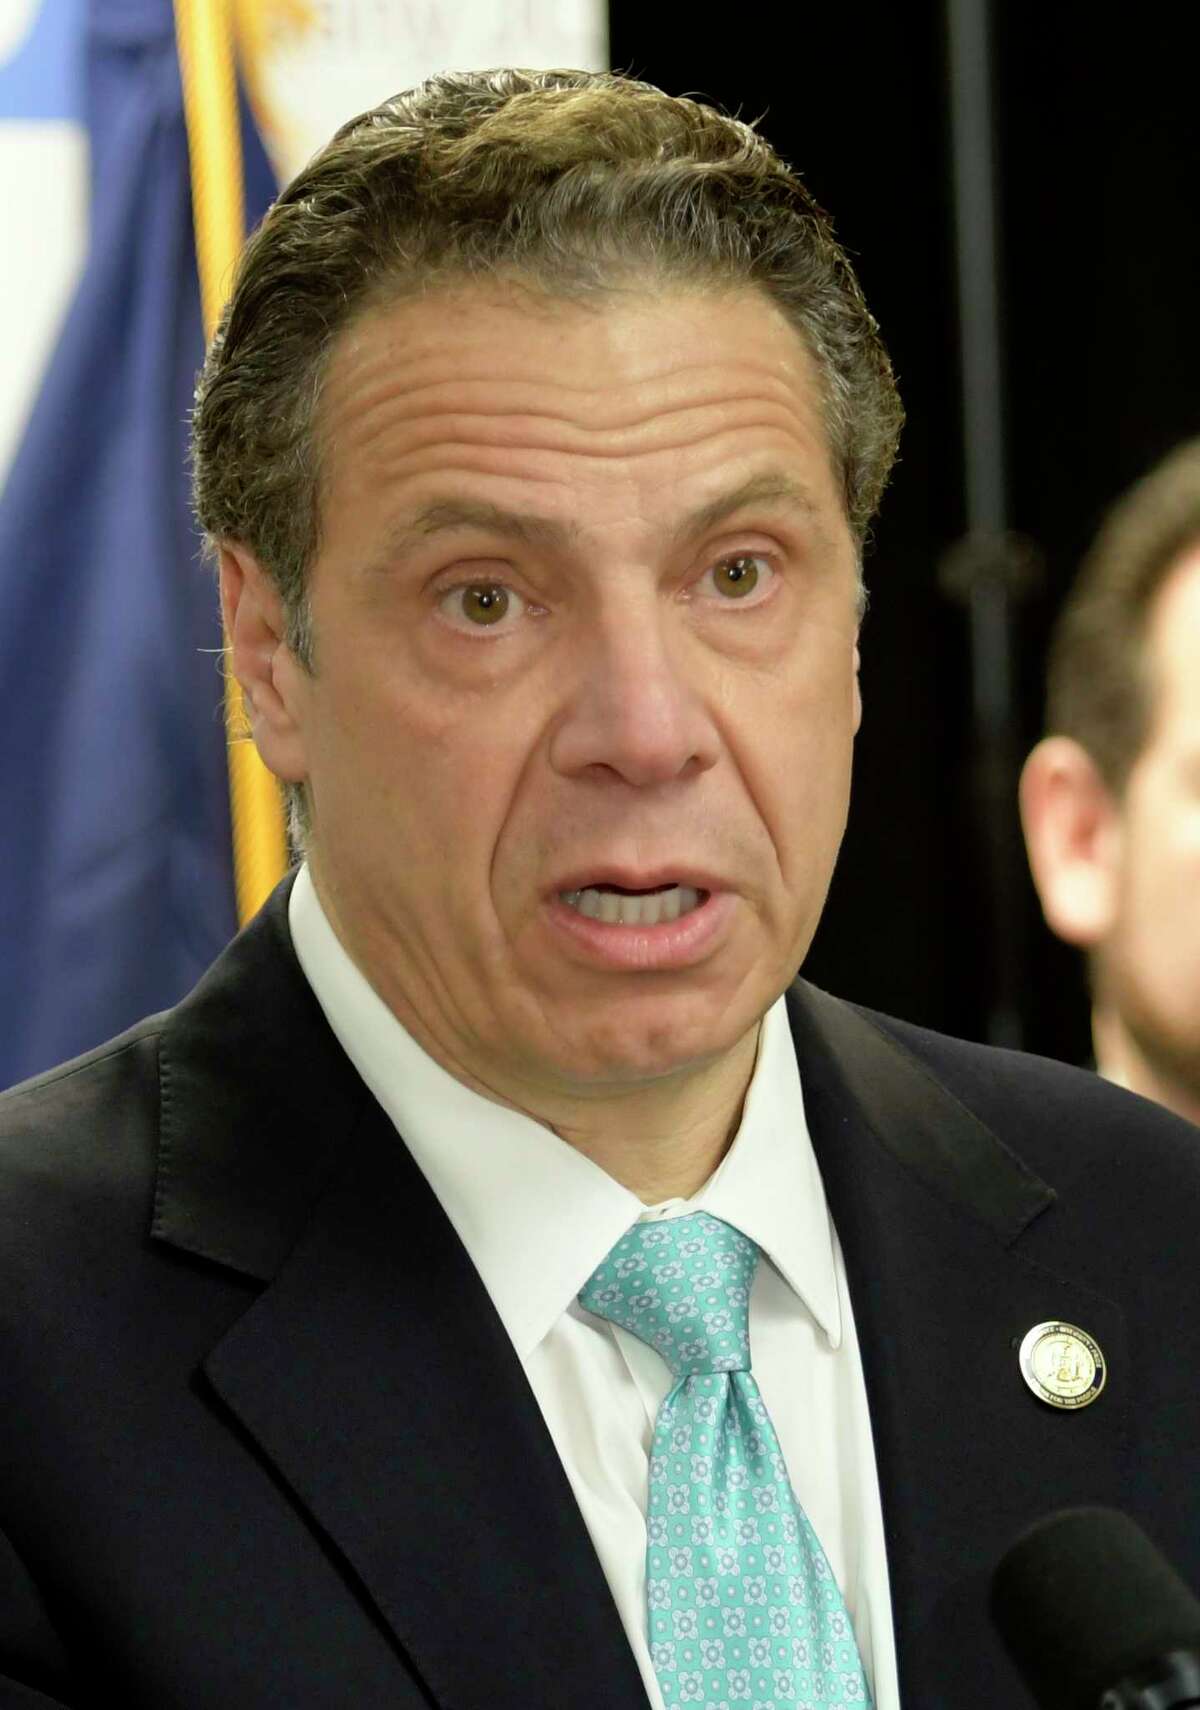 Governor Andrew Cuomo speaks at a press conference on the subject of hate crimes held at the Sidney Albert Albany JCC Wednesday Mar, 1 2017 in Albany, N.Y. (Skip Dickstein/Times Union)